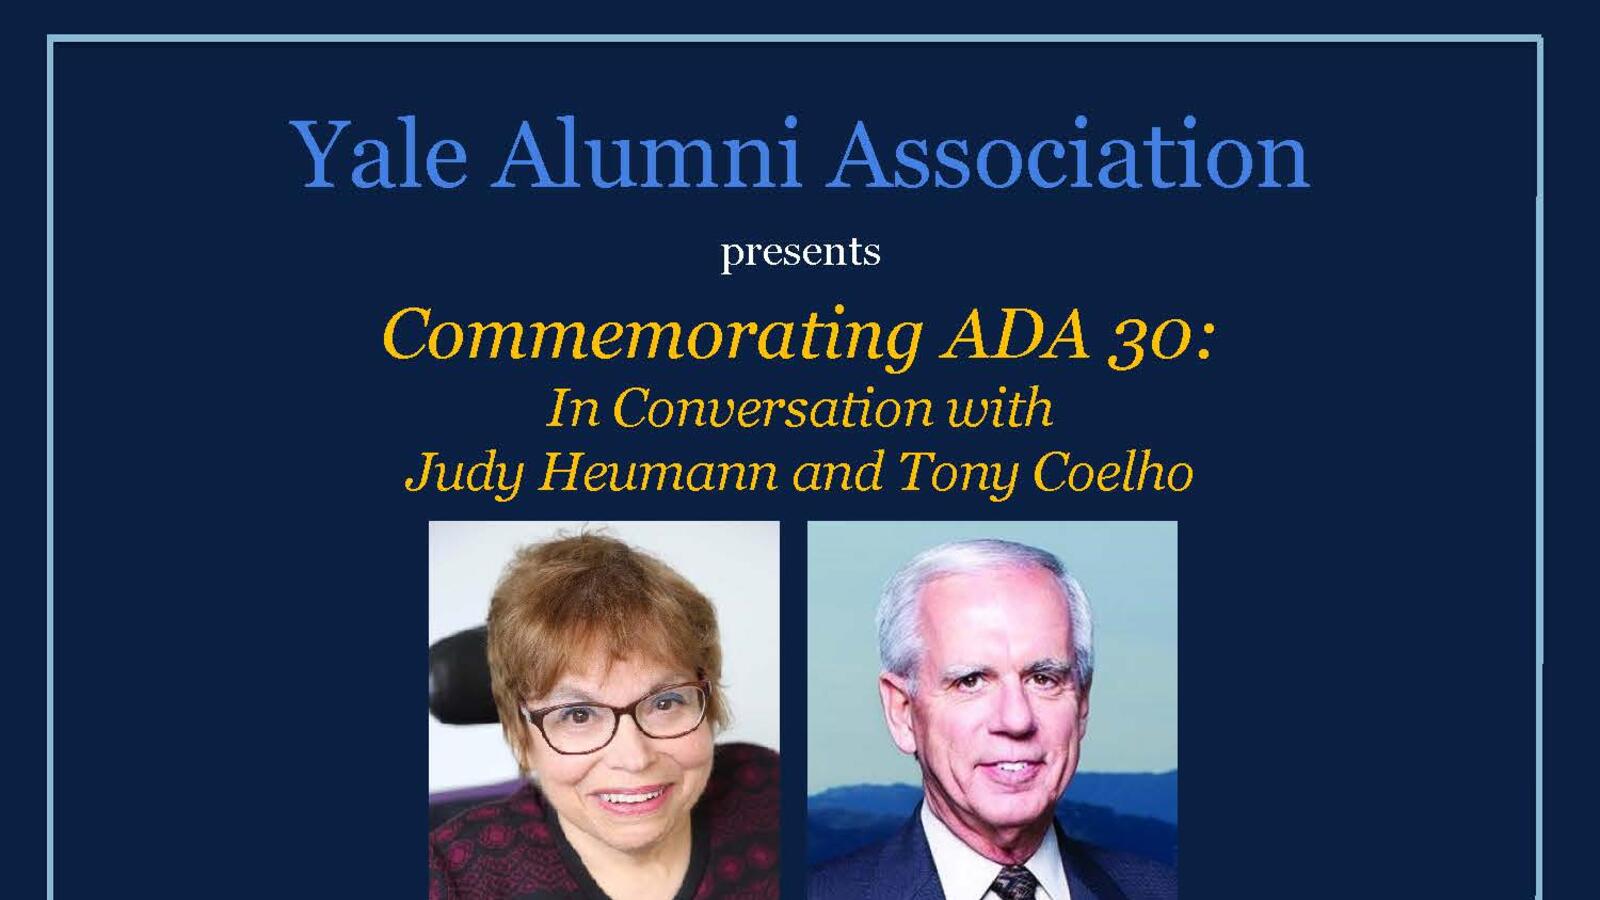 Commemorating ADA 30: In Conversation with Judy Heumann and Tony Coelho